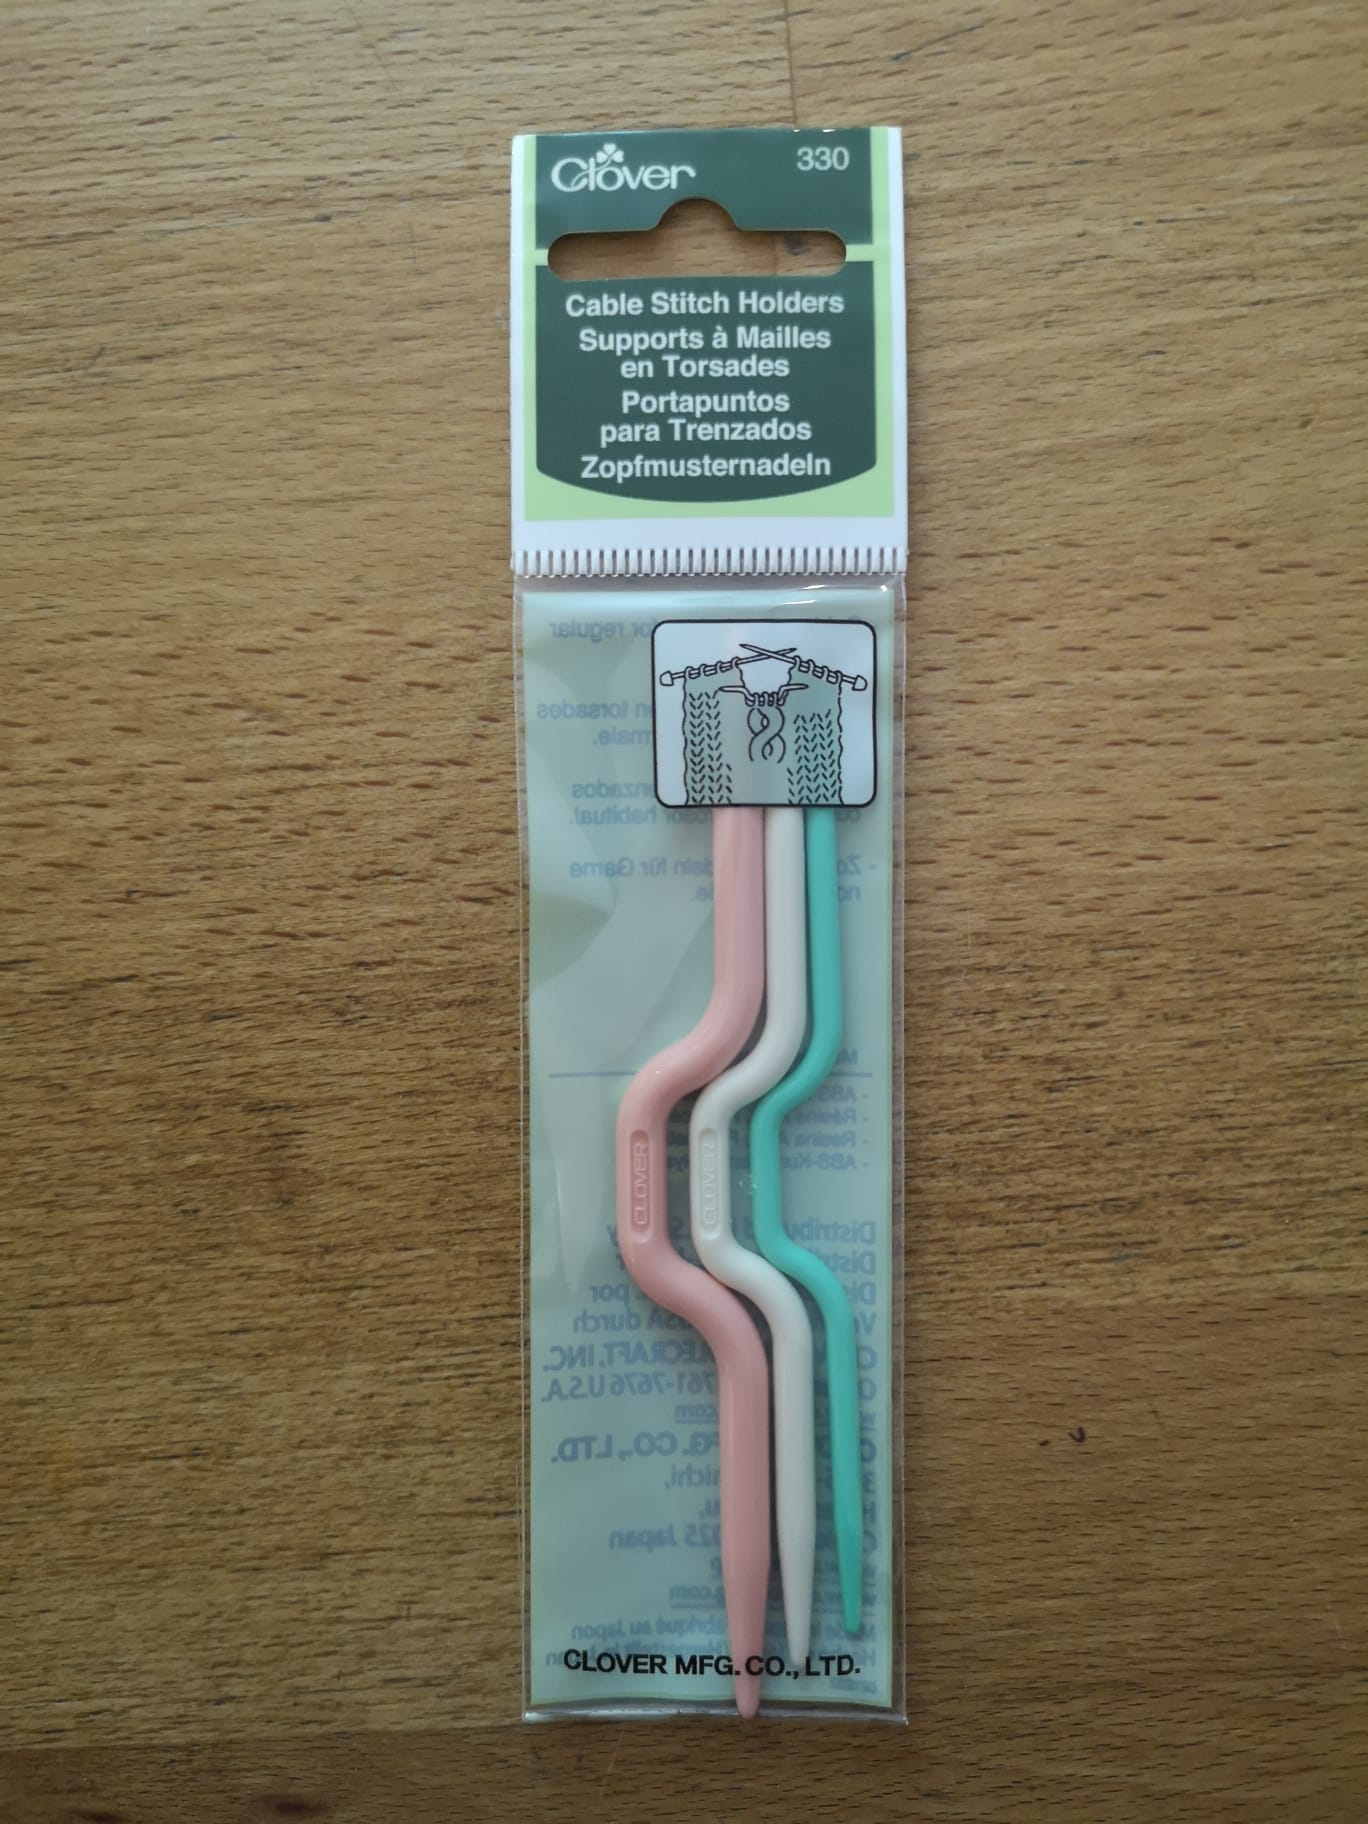 Standard type cable stitch holder in 3 different sizes. Pink is large, white is medium and green is small.